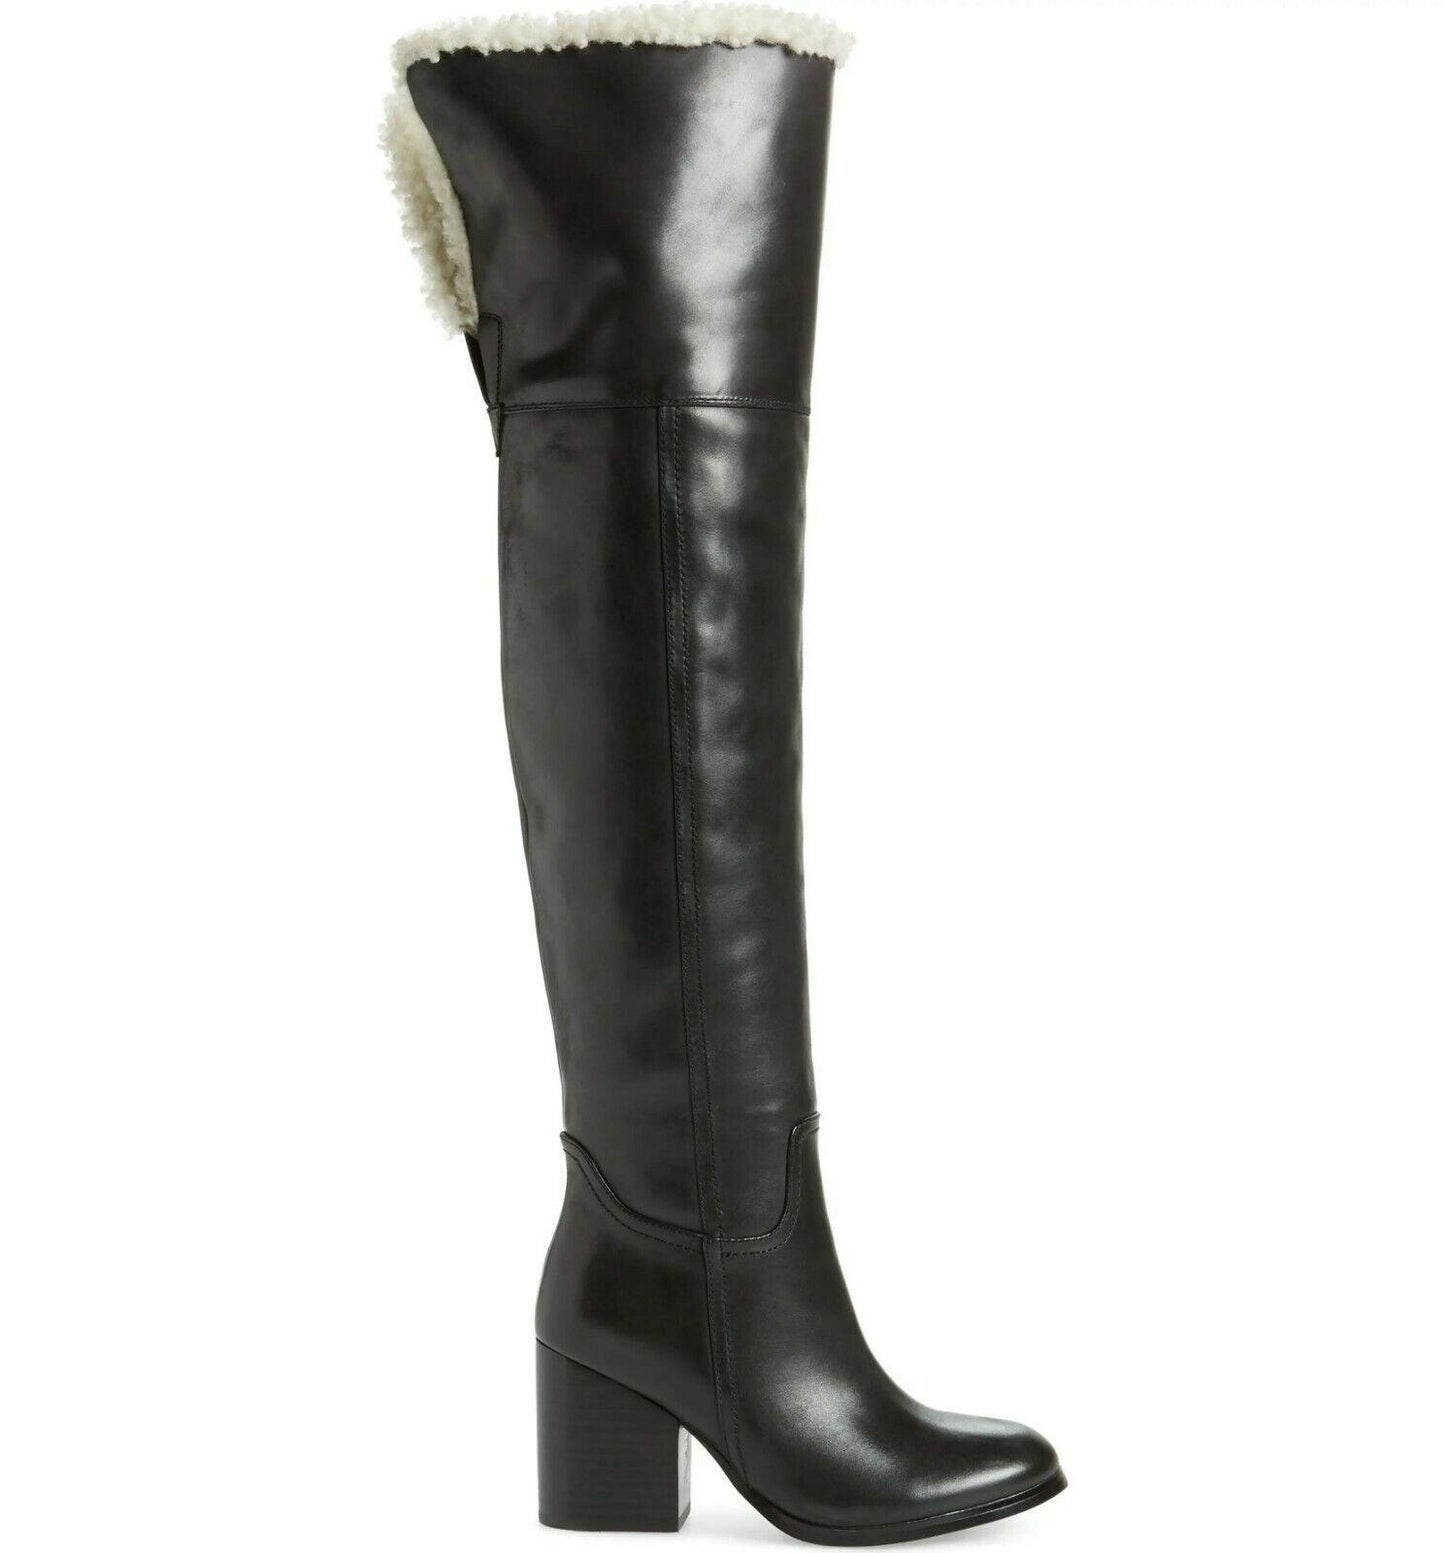 NEW JEFFREY CAMPBELL Woodvurn Black Leather Ivory Fur Over the Knee Boot 8.5 - SVNYFancy